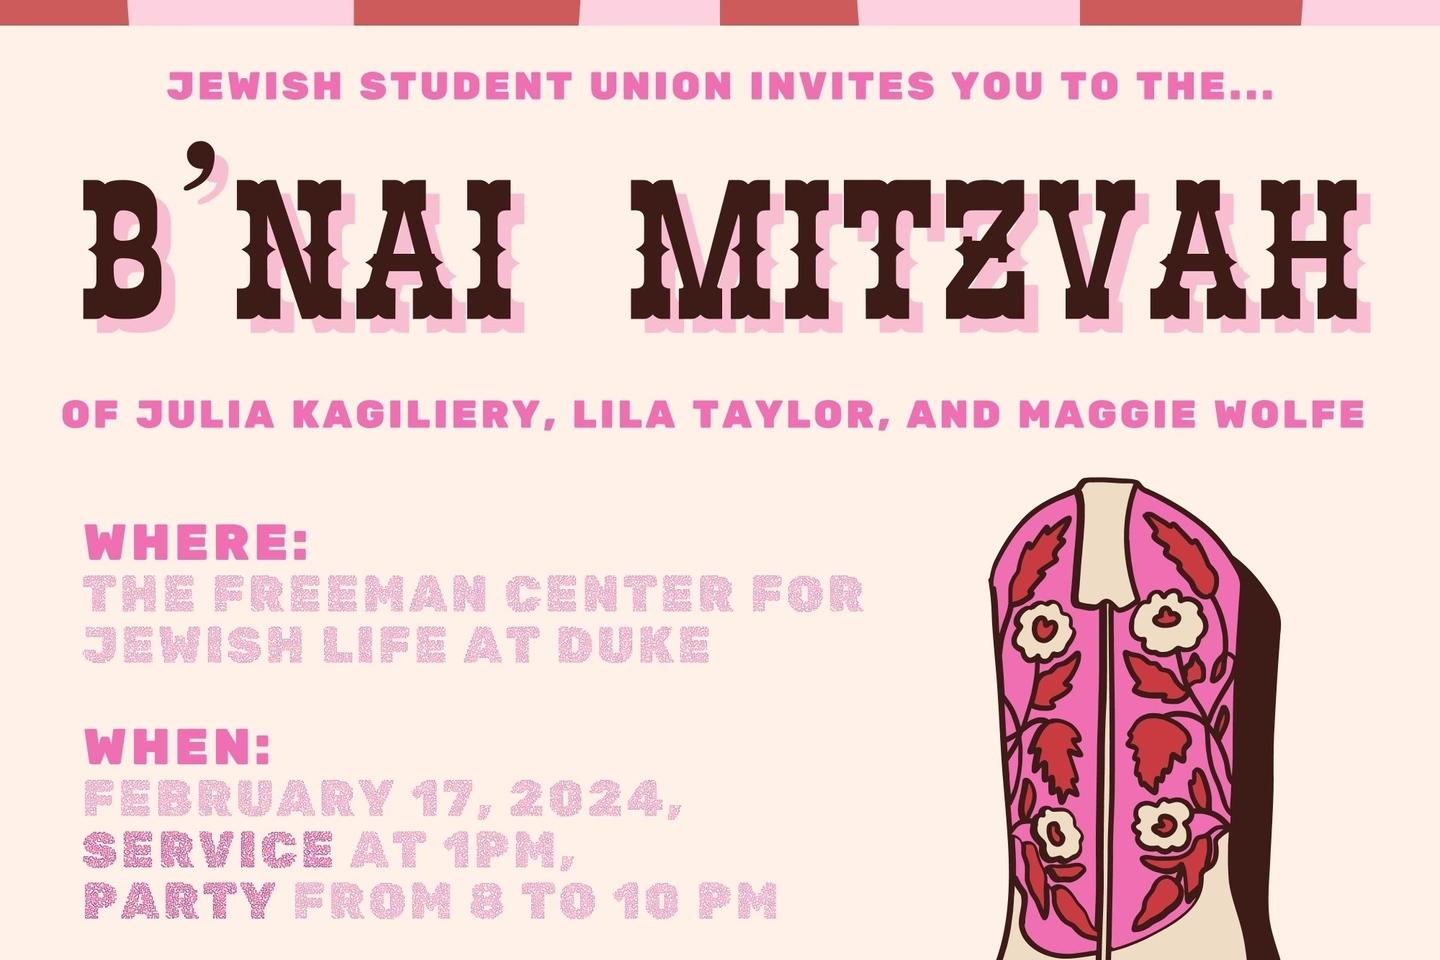 JSU invites you to the bnai mitzvah